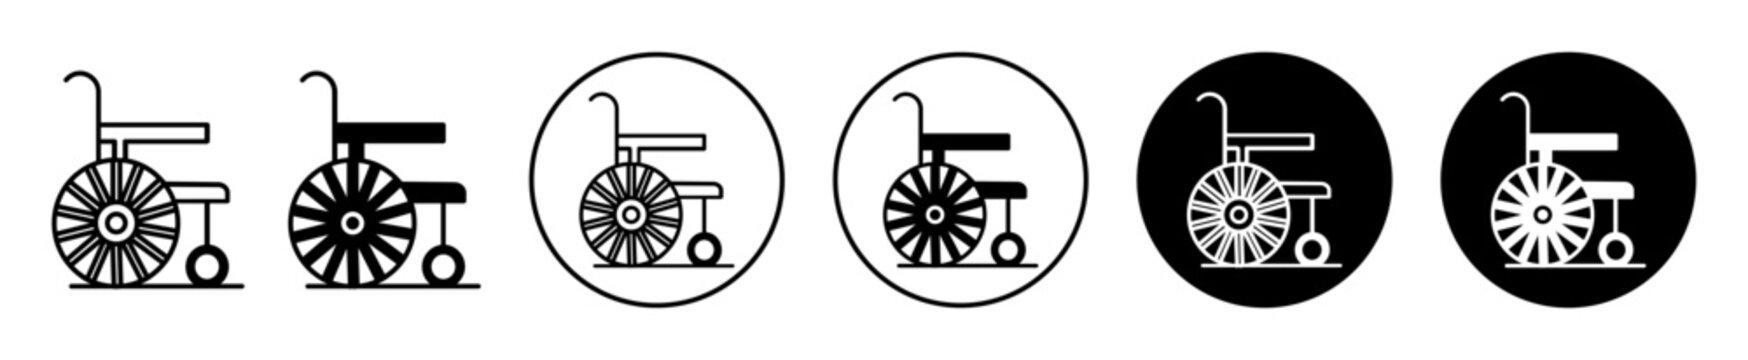 Wheelchair symbol icon sign collection in white and black